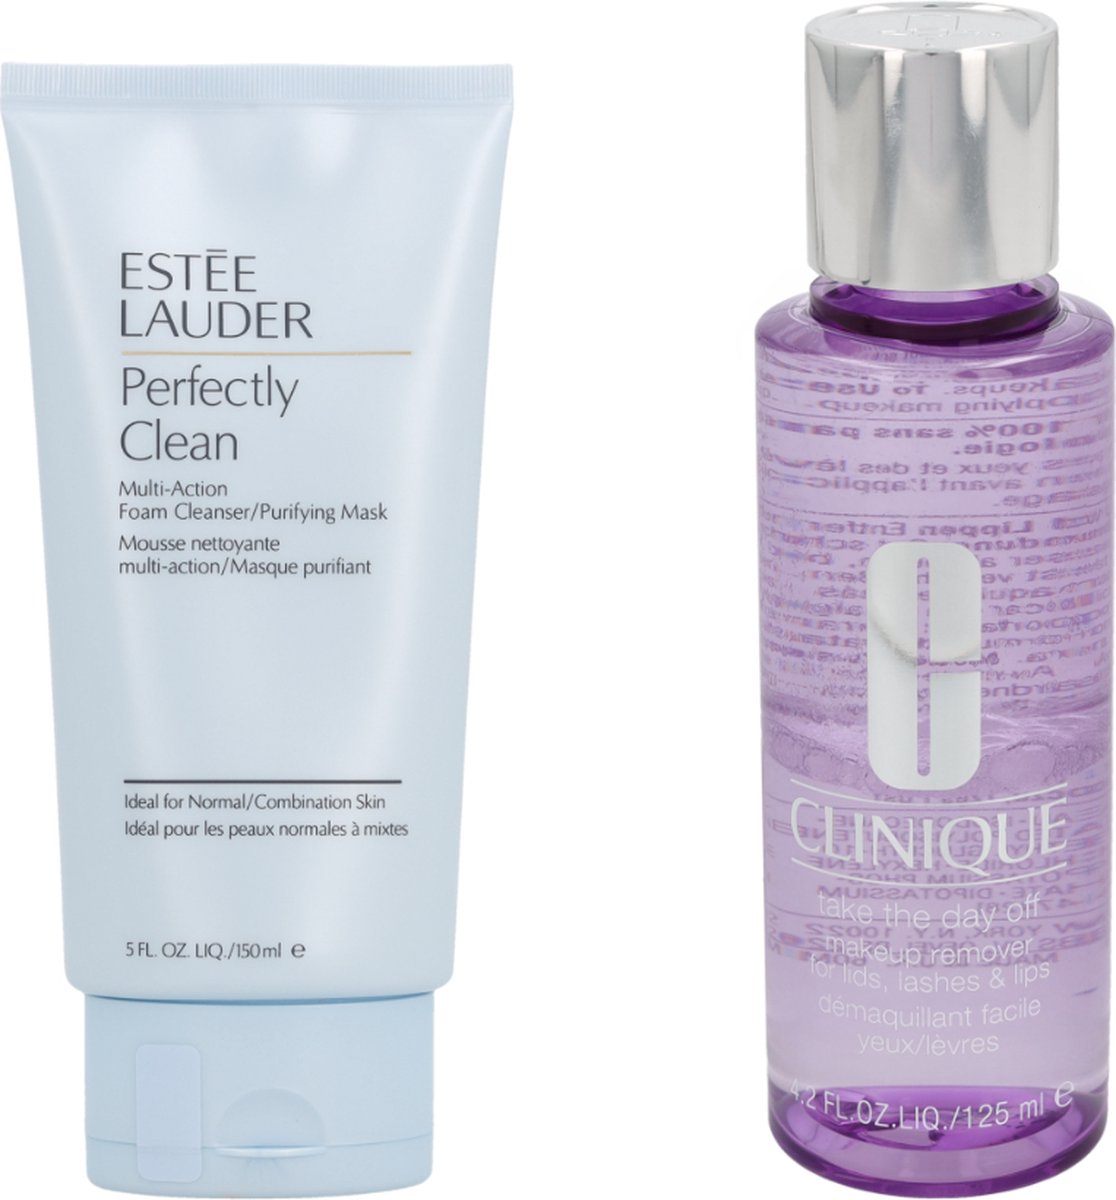 Bundel: Clinique Take The Day Off Makeup Remover 125ml + E.Lauder Perfectly Clean Foam Cleanser/Purif Mask 150ml